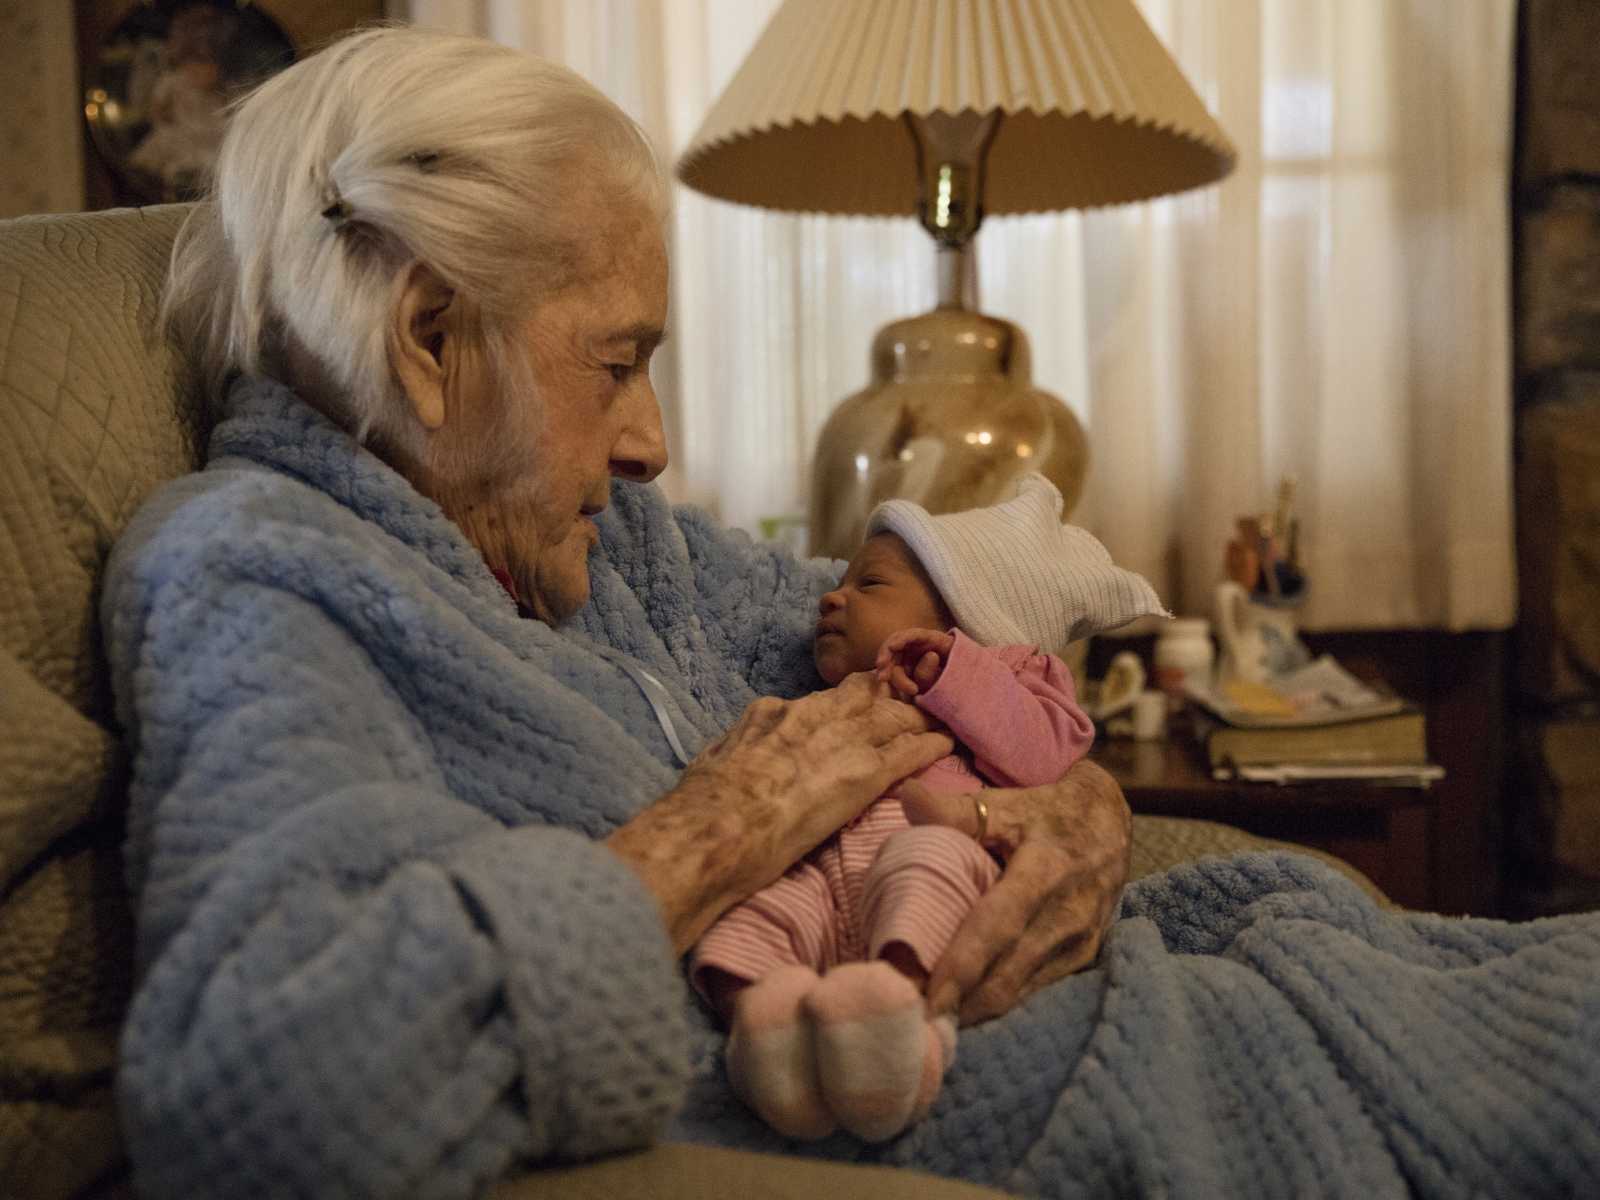 92 year old woman sits looking down at newborn in her lap who is her namesake